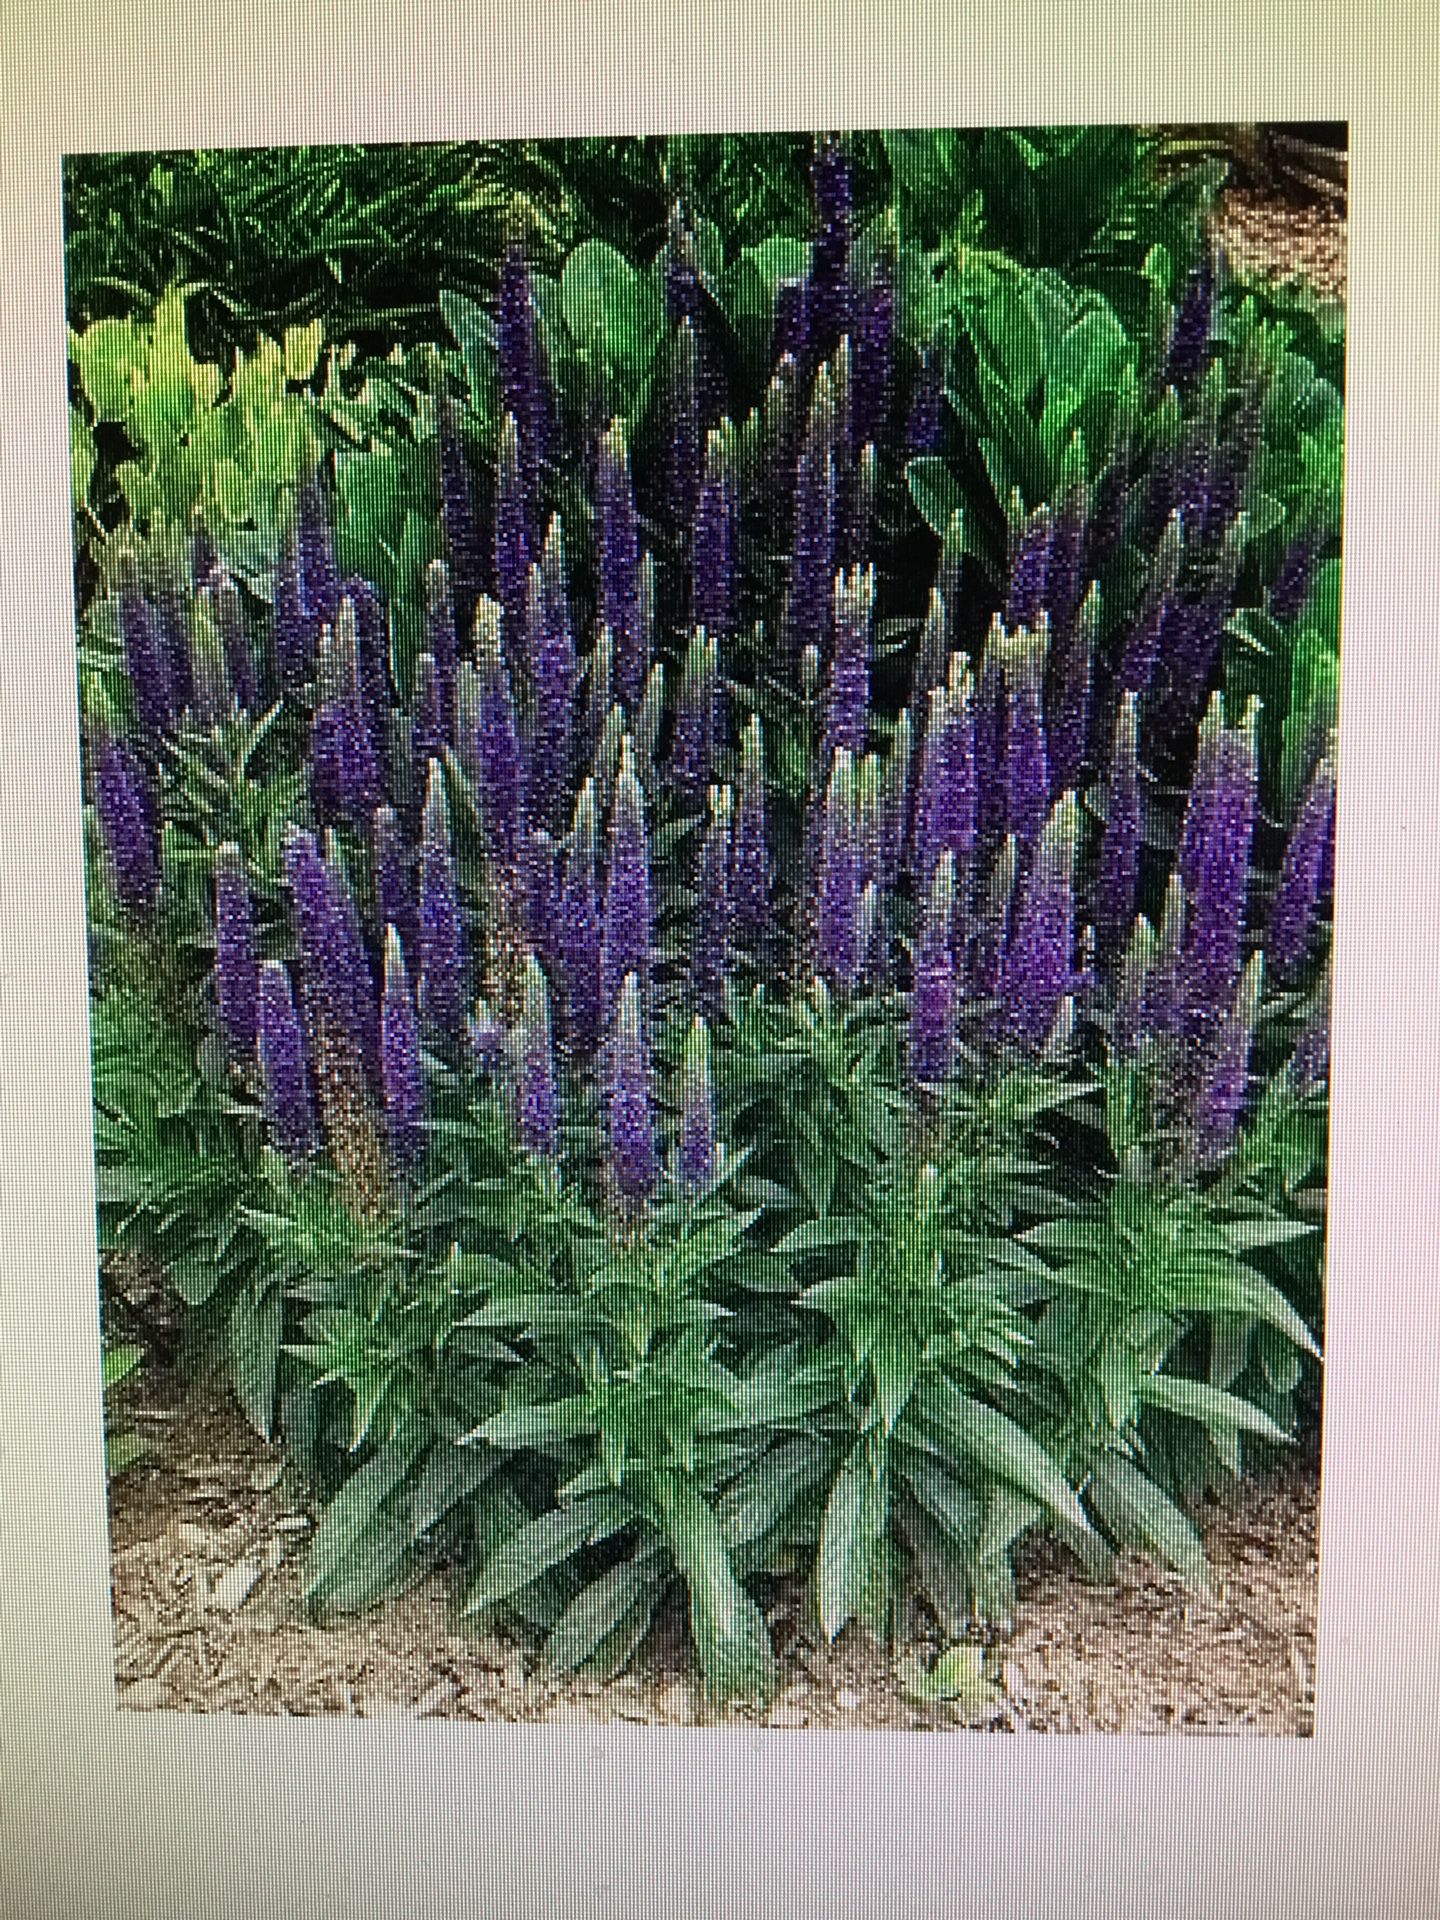 One Gallon Pot Of Purple Flowering Speedwell Perennial Plant.      Main Photo For Display Purposes.  One Plant Available 